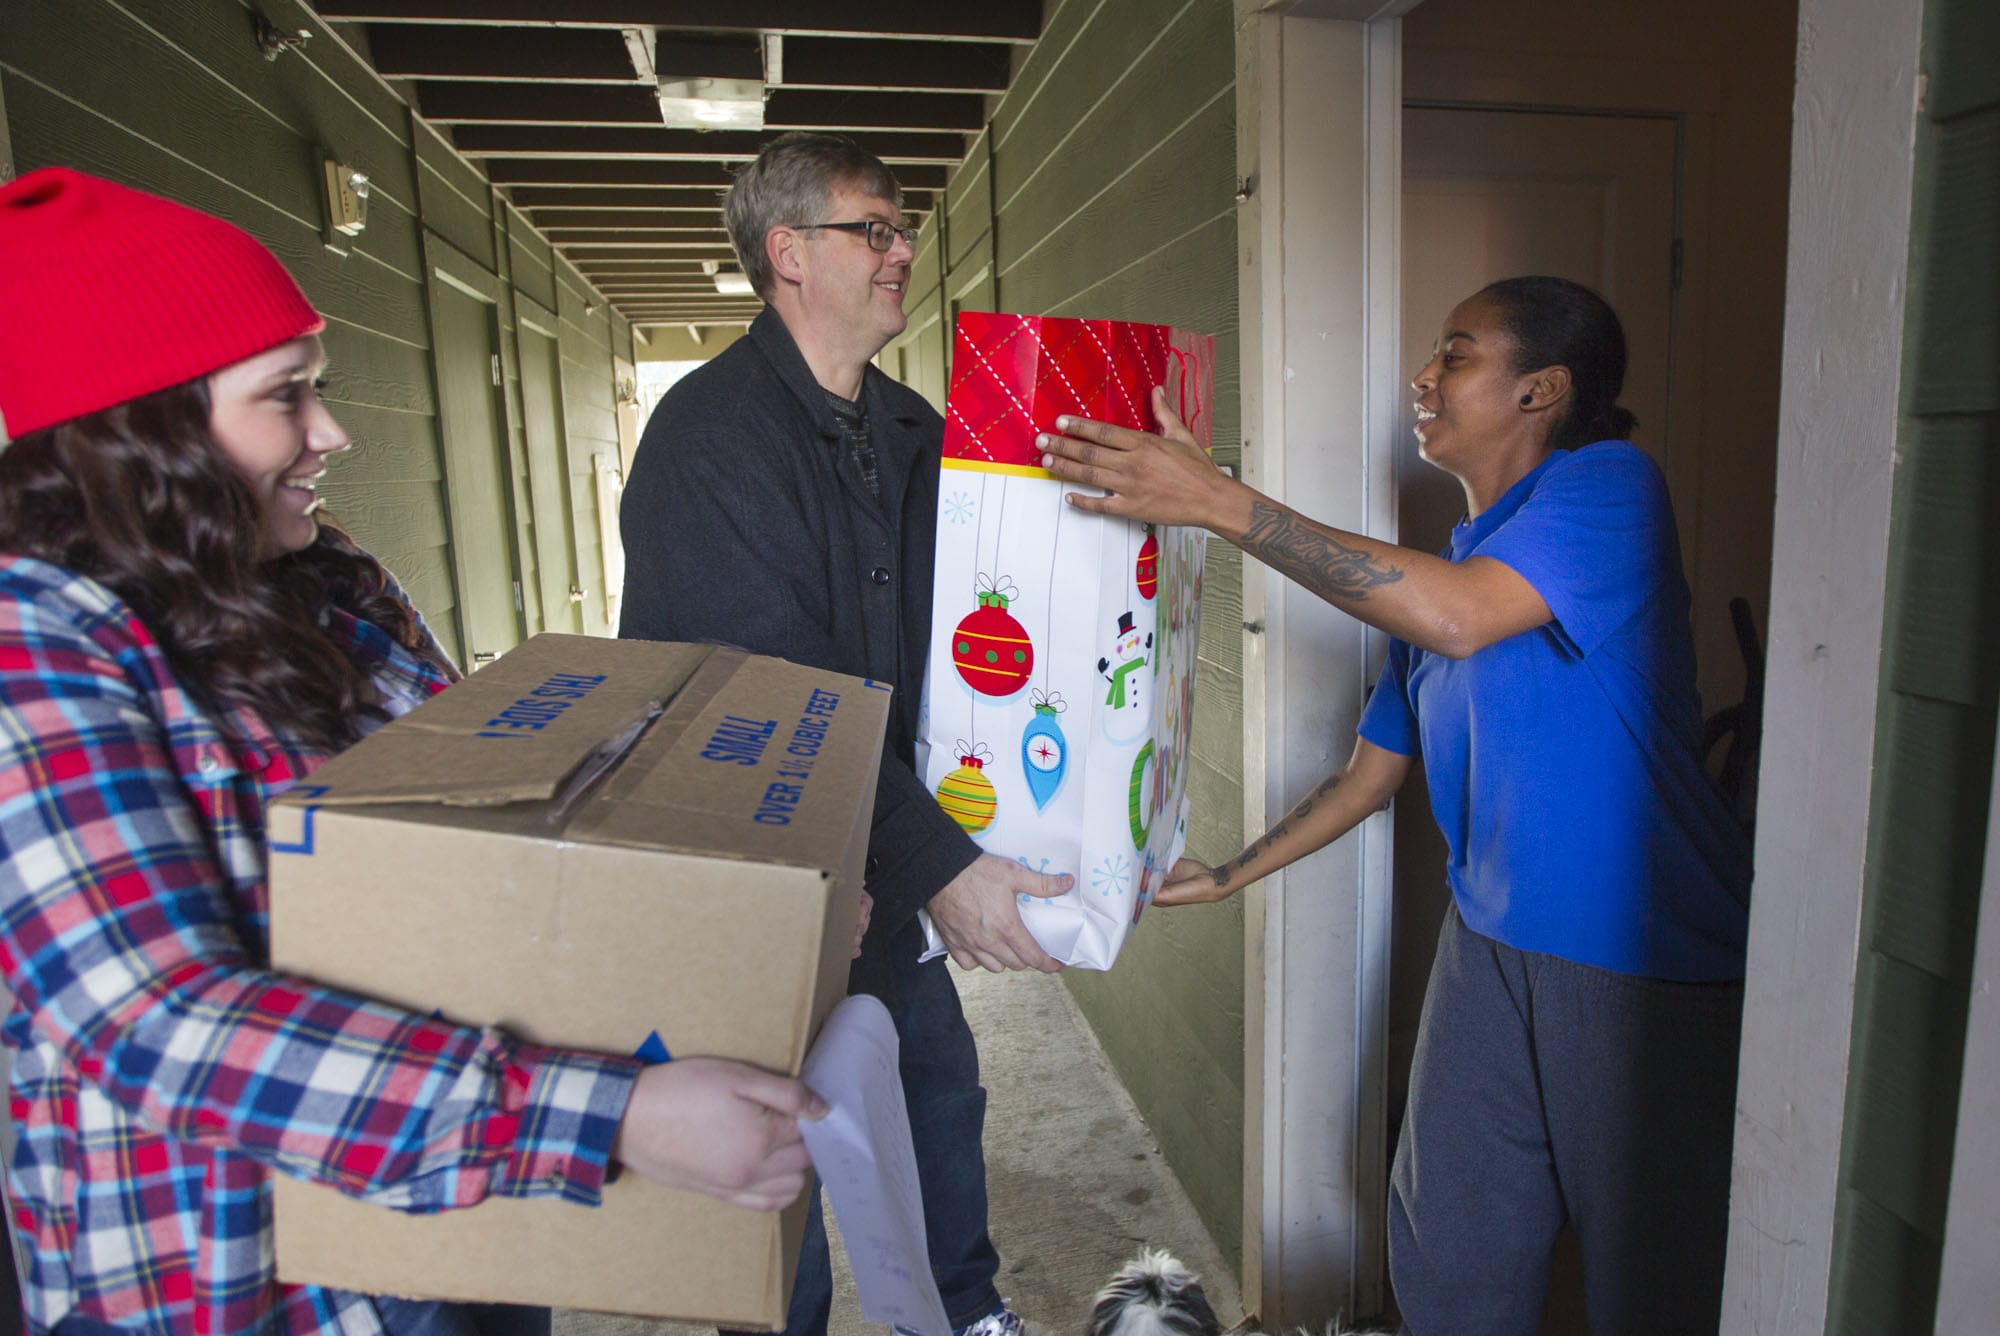 Volunteer Taylor Vossen, from left, and Woodland Rotary Club President Jeff Stay deliver a box of food to Latoya Black on Monday in Woodland.